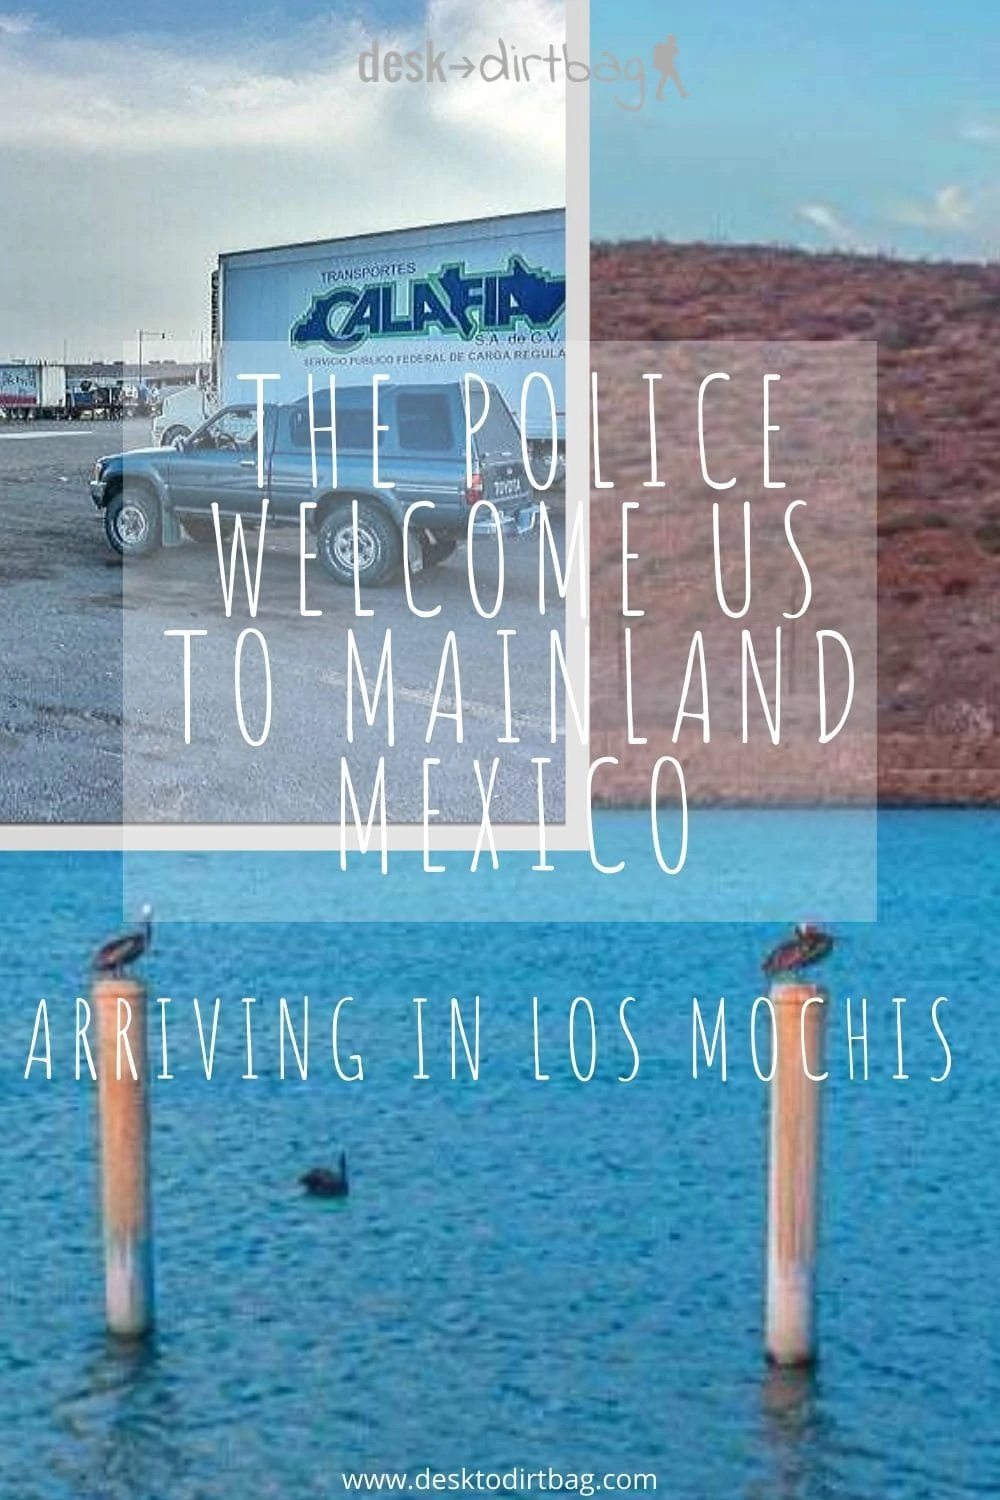 The Police Welcome Us to the Mainland: Arriving in Los Mochis Mexico mexico, central-america